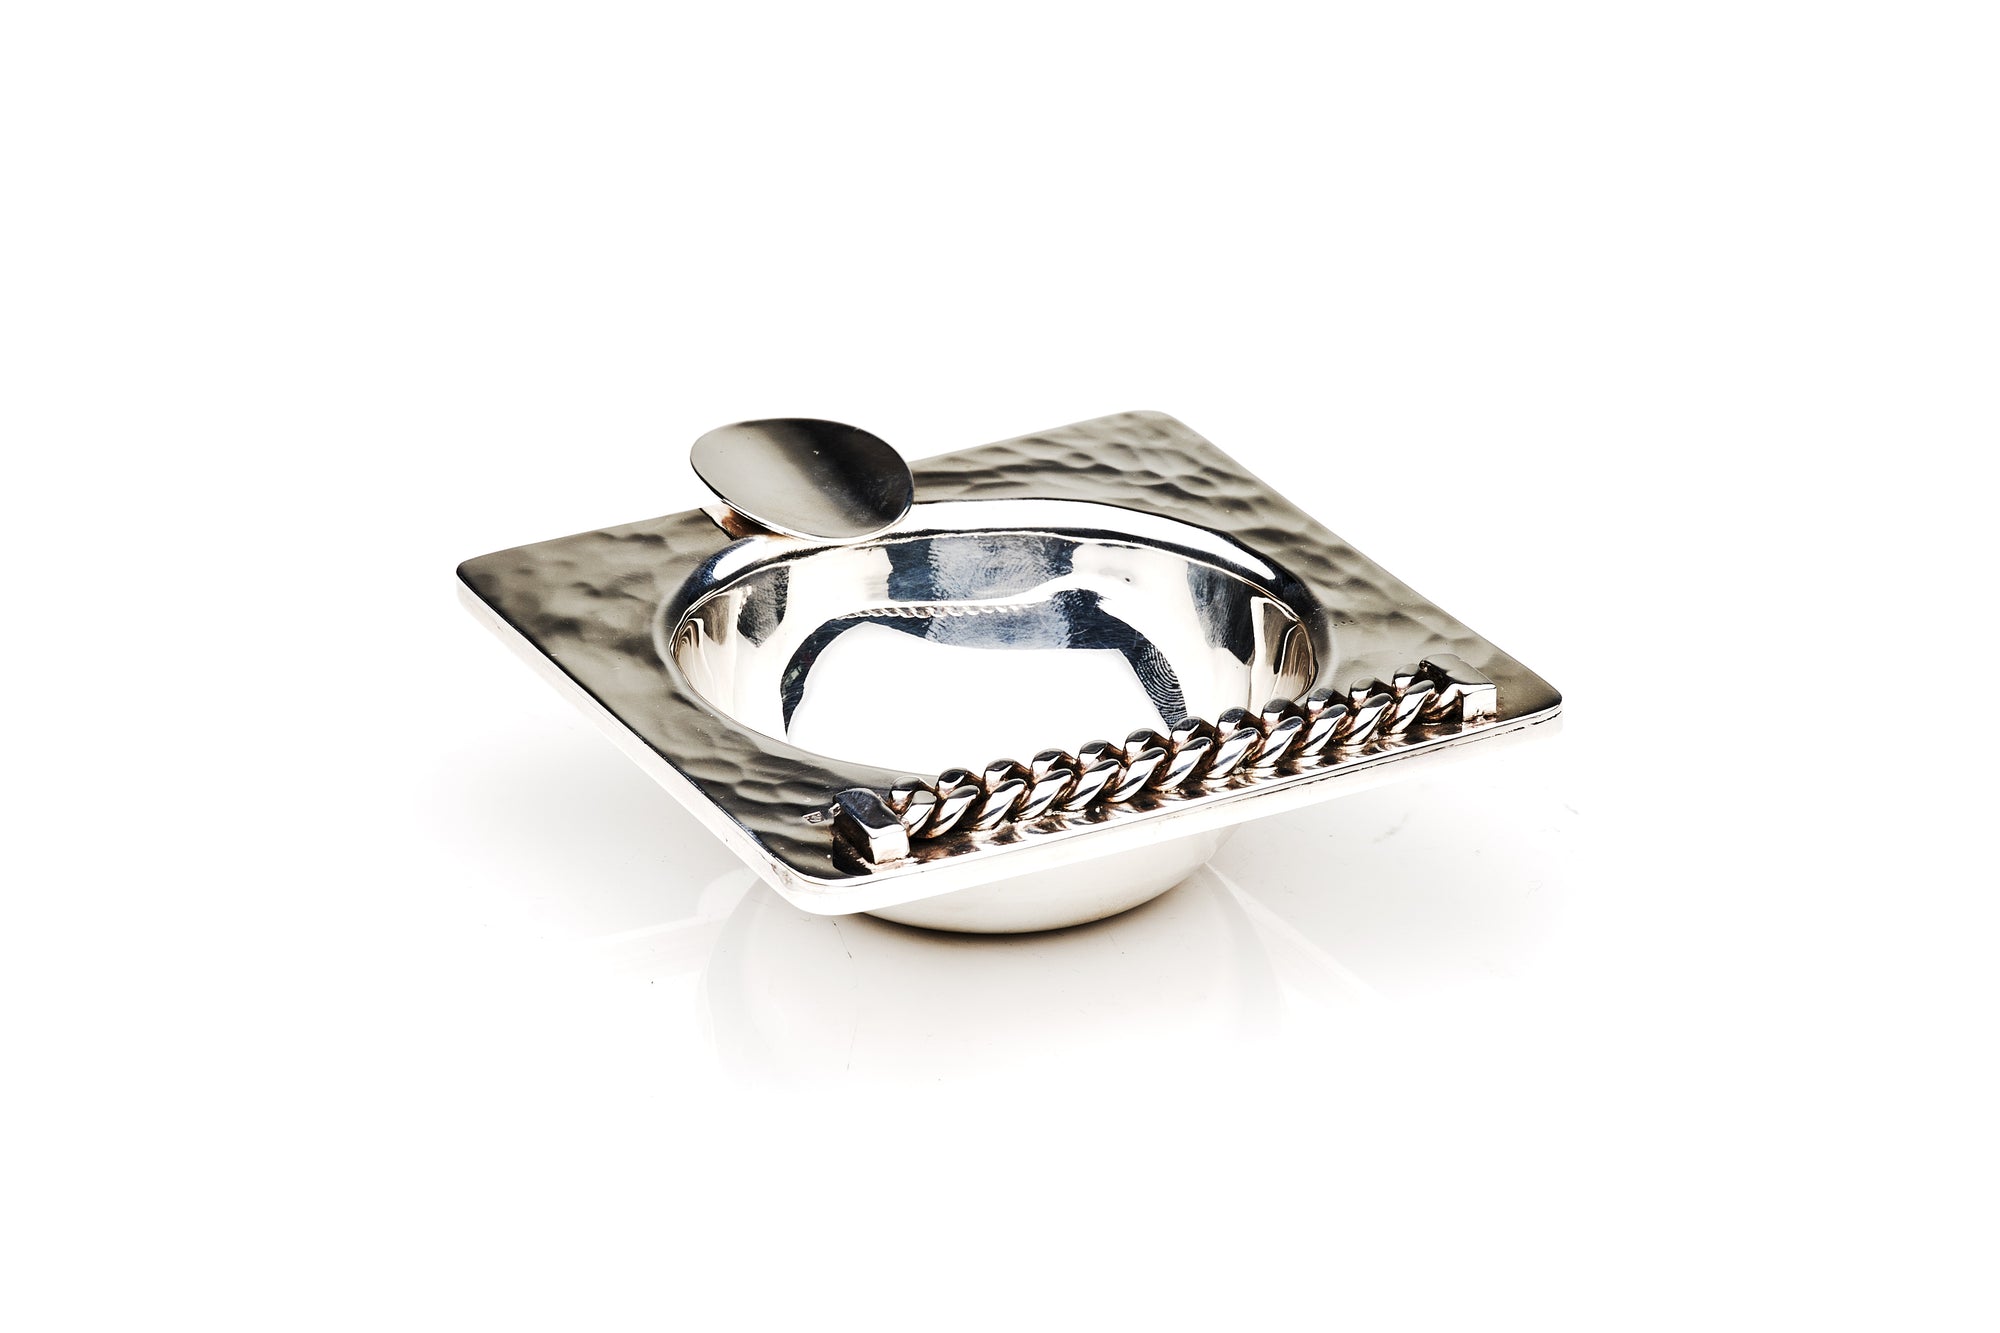 French Chainlink Ashtray